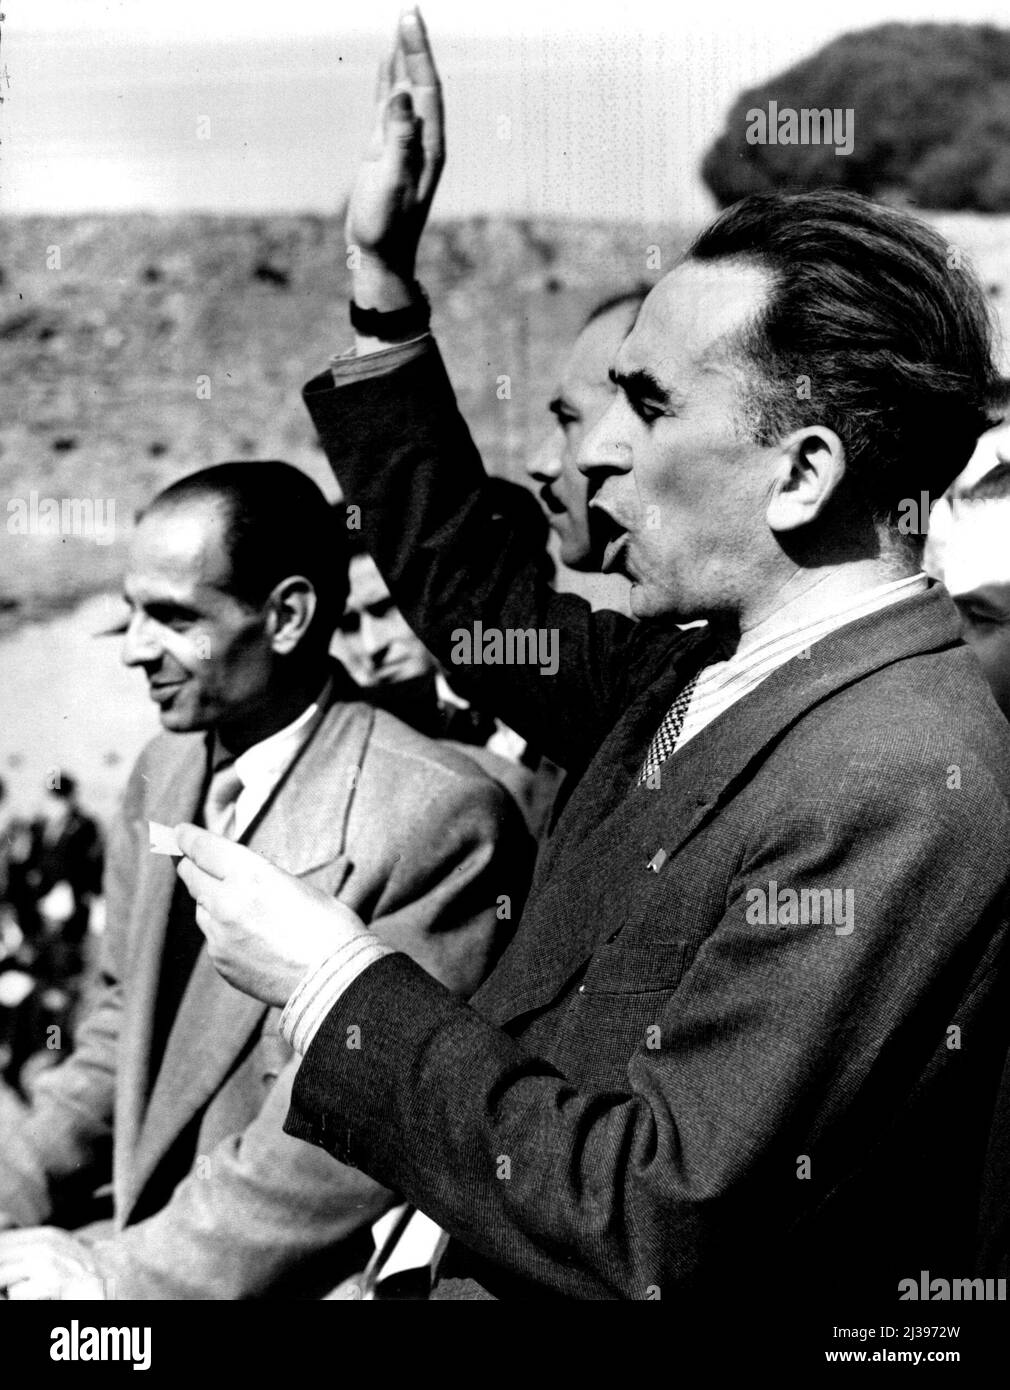 Italian Leaders Asks For Elections. Luigo Longo, (standing on Rostrum), communist leader and former partisan commander in North Italy, addresses 20,000 in the stadium of Domitian on Palatine hill, Rome, Italy, Oct. 14. He asked for immediate elections in Italy to foster democracy and start the nation on the reconstruction road. October 21, 1945. (Photo by Associated Press Photo) Stock Photo